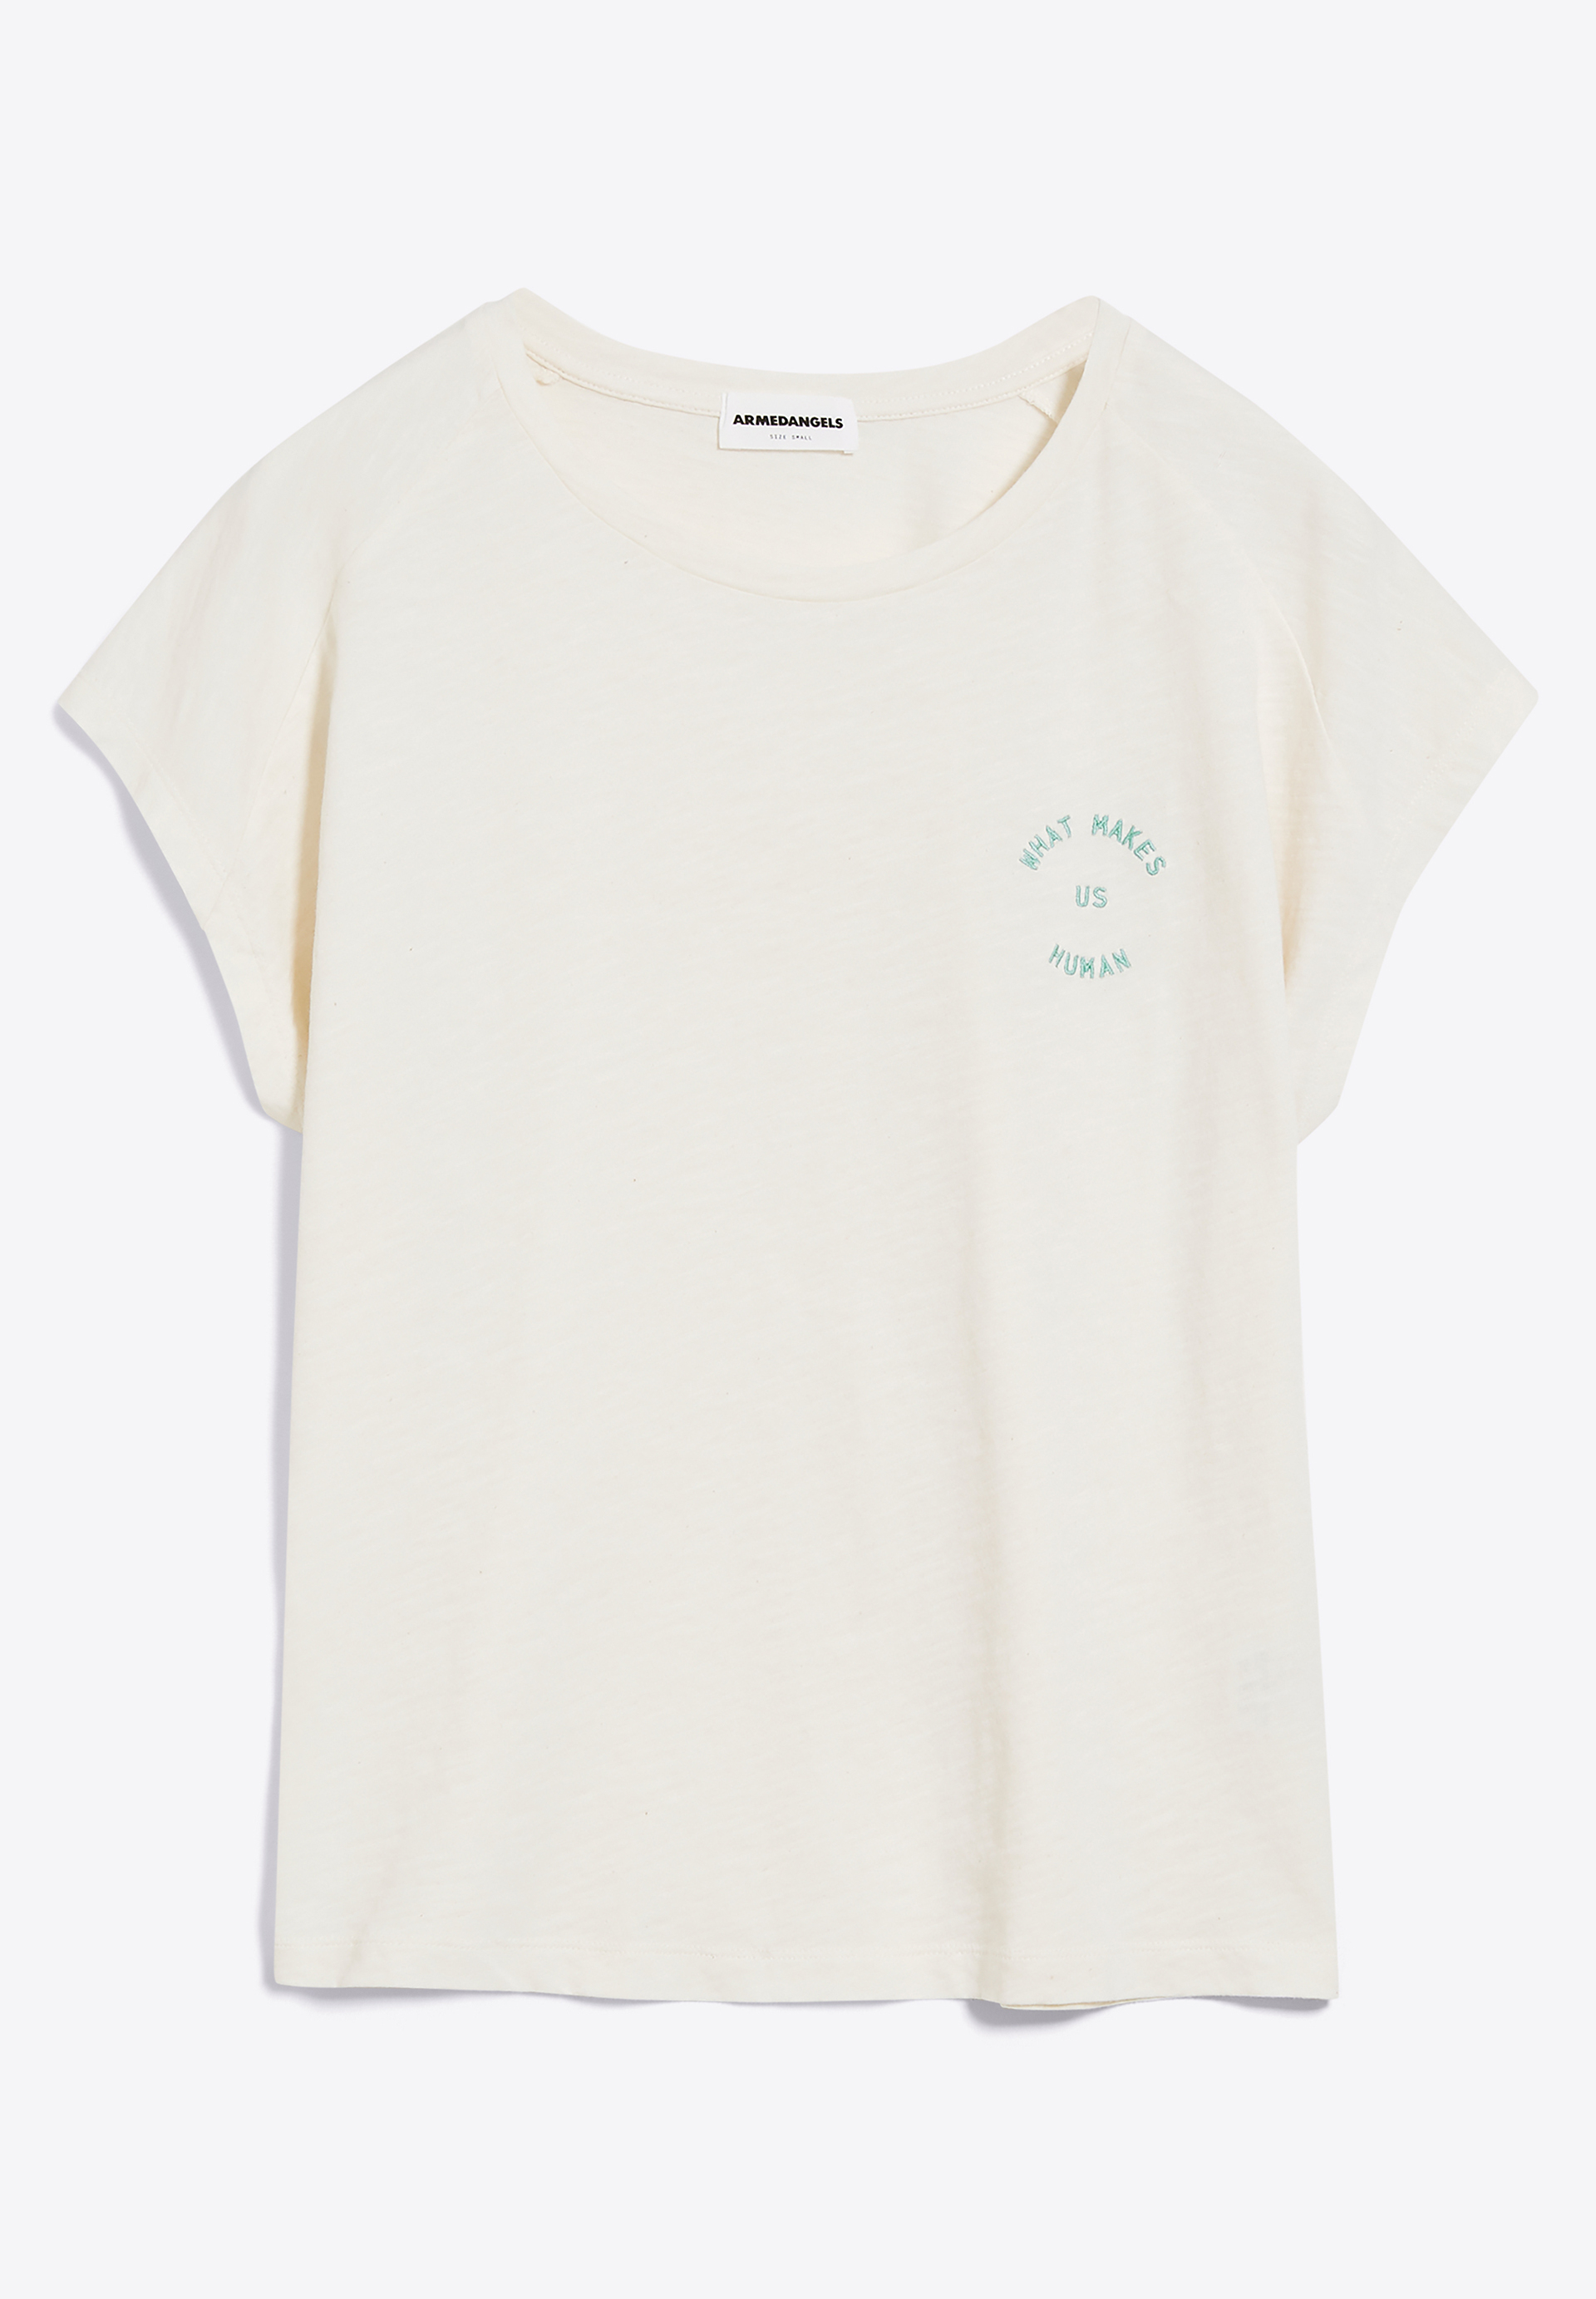 ONELIAA QUOTE T-Shirt Loose Fit made of Organic Cotton